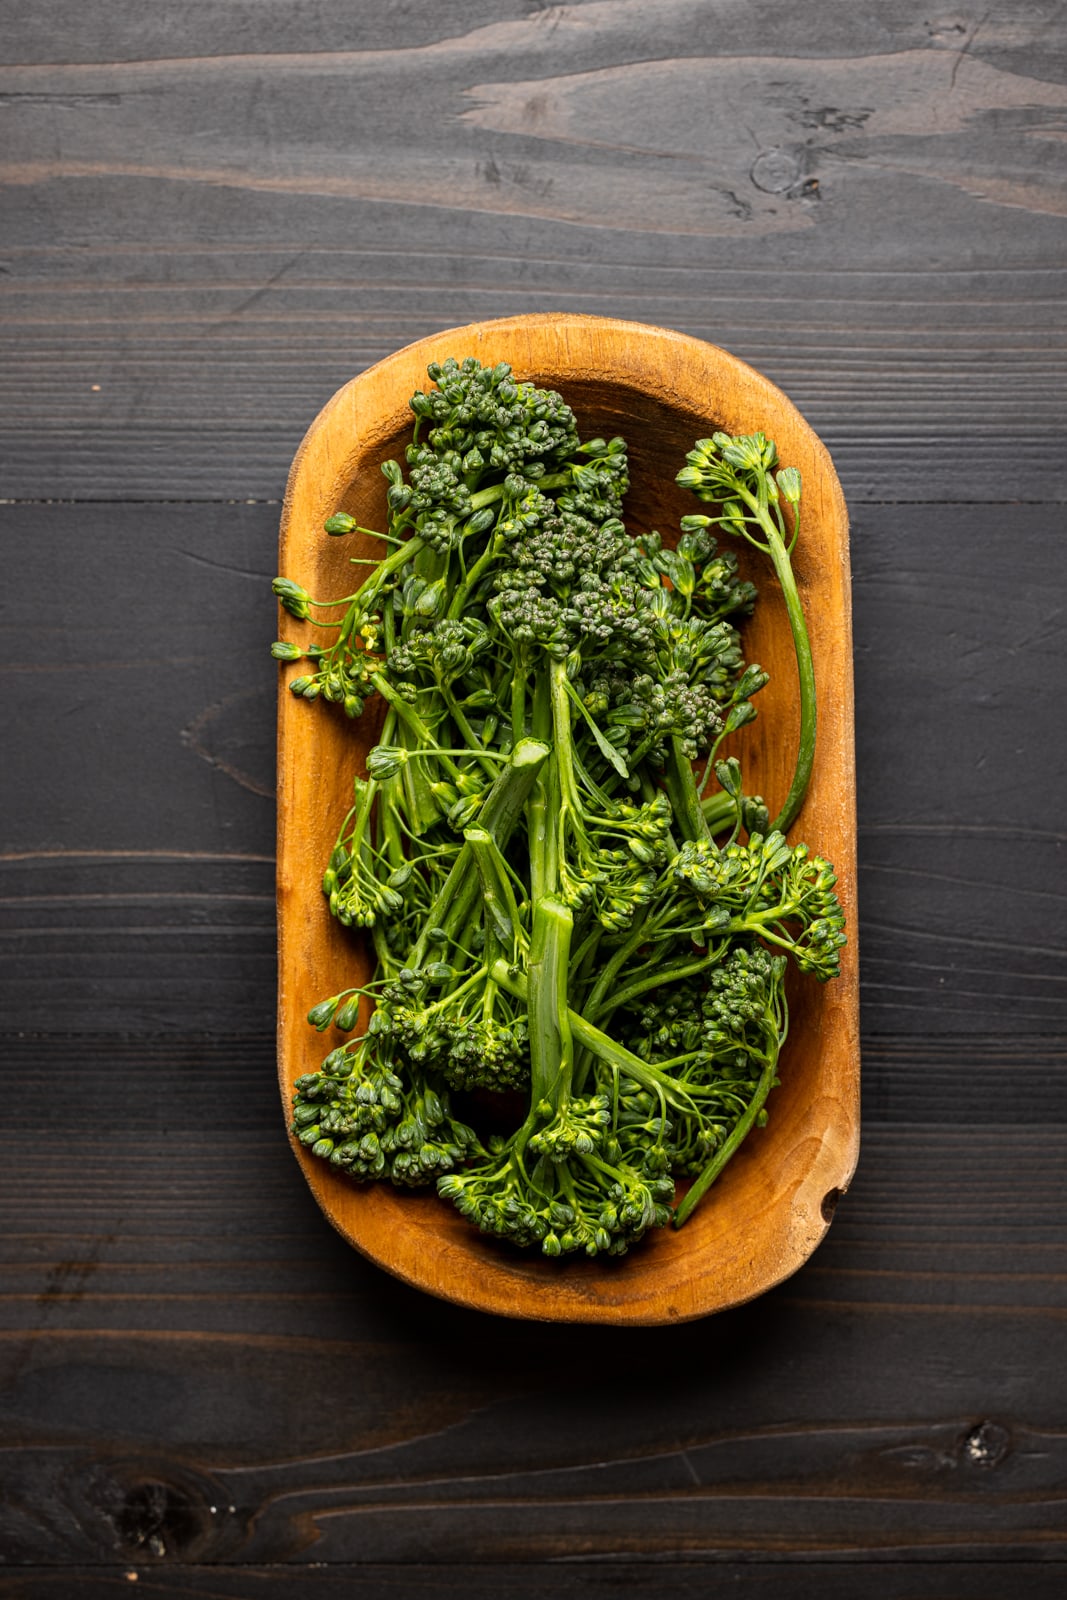 Broccolini in a wood bowl on a black table.